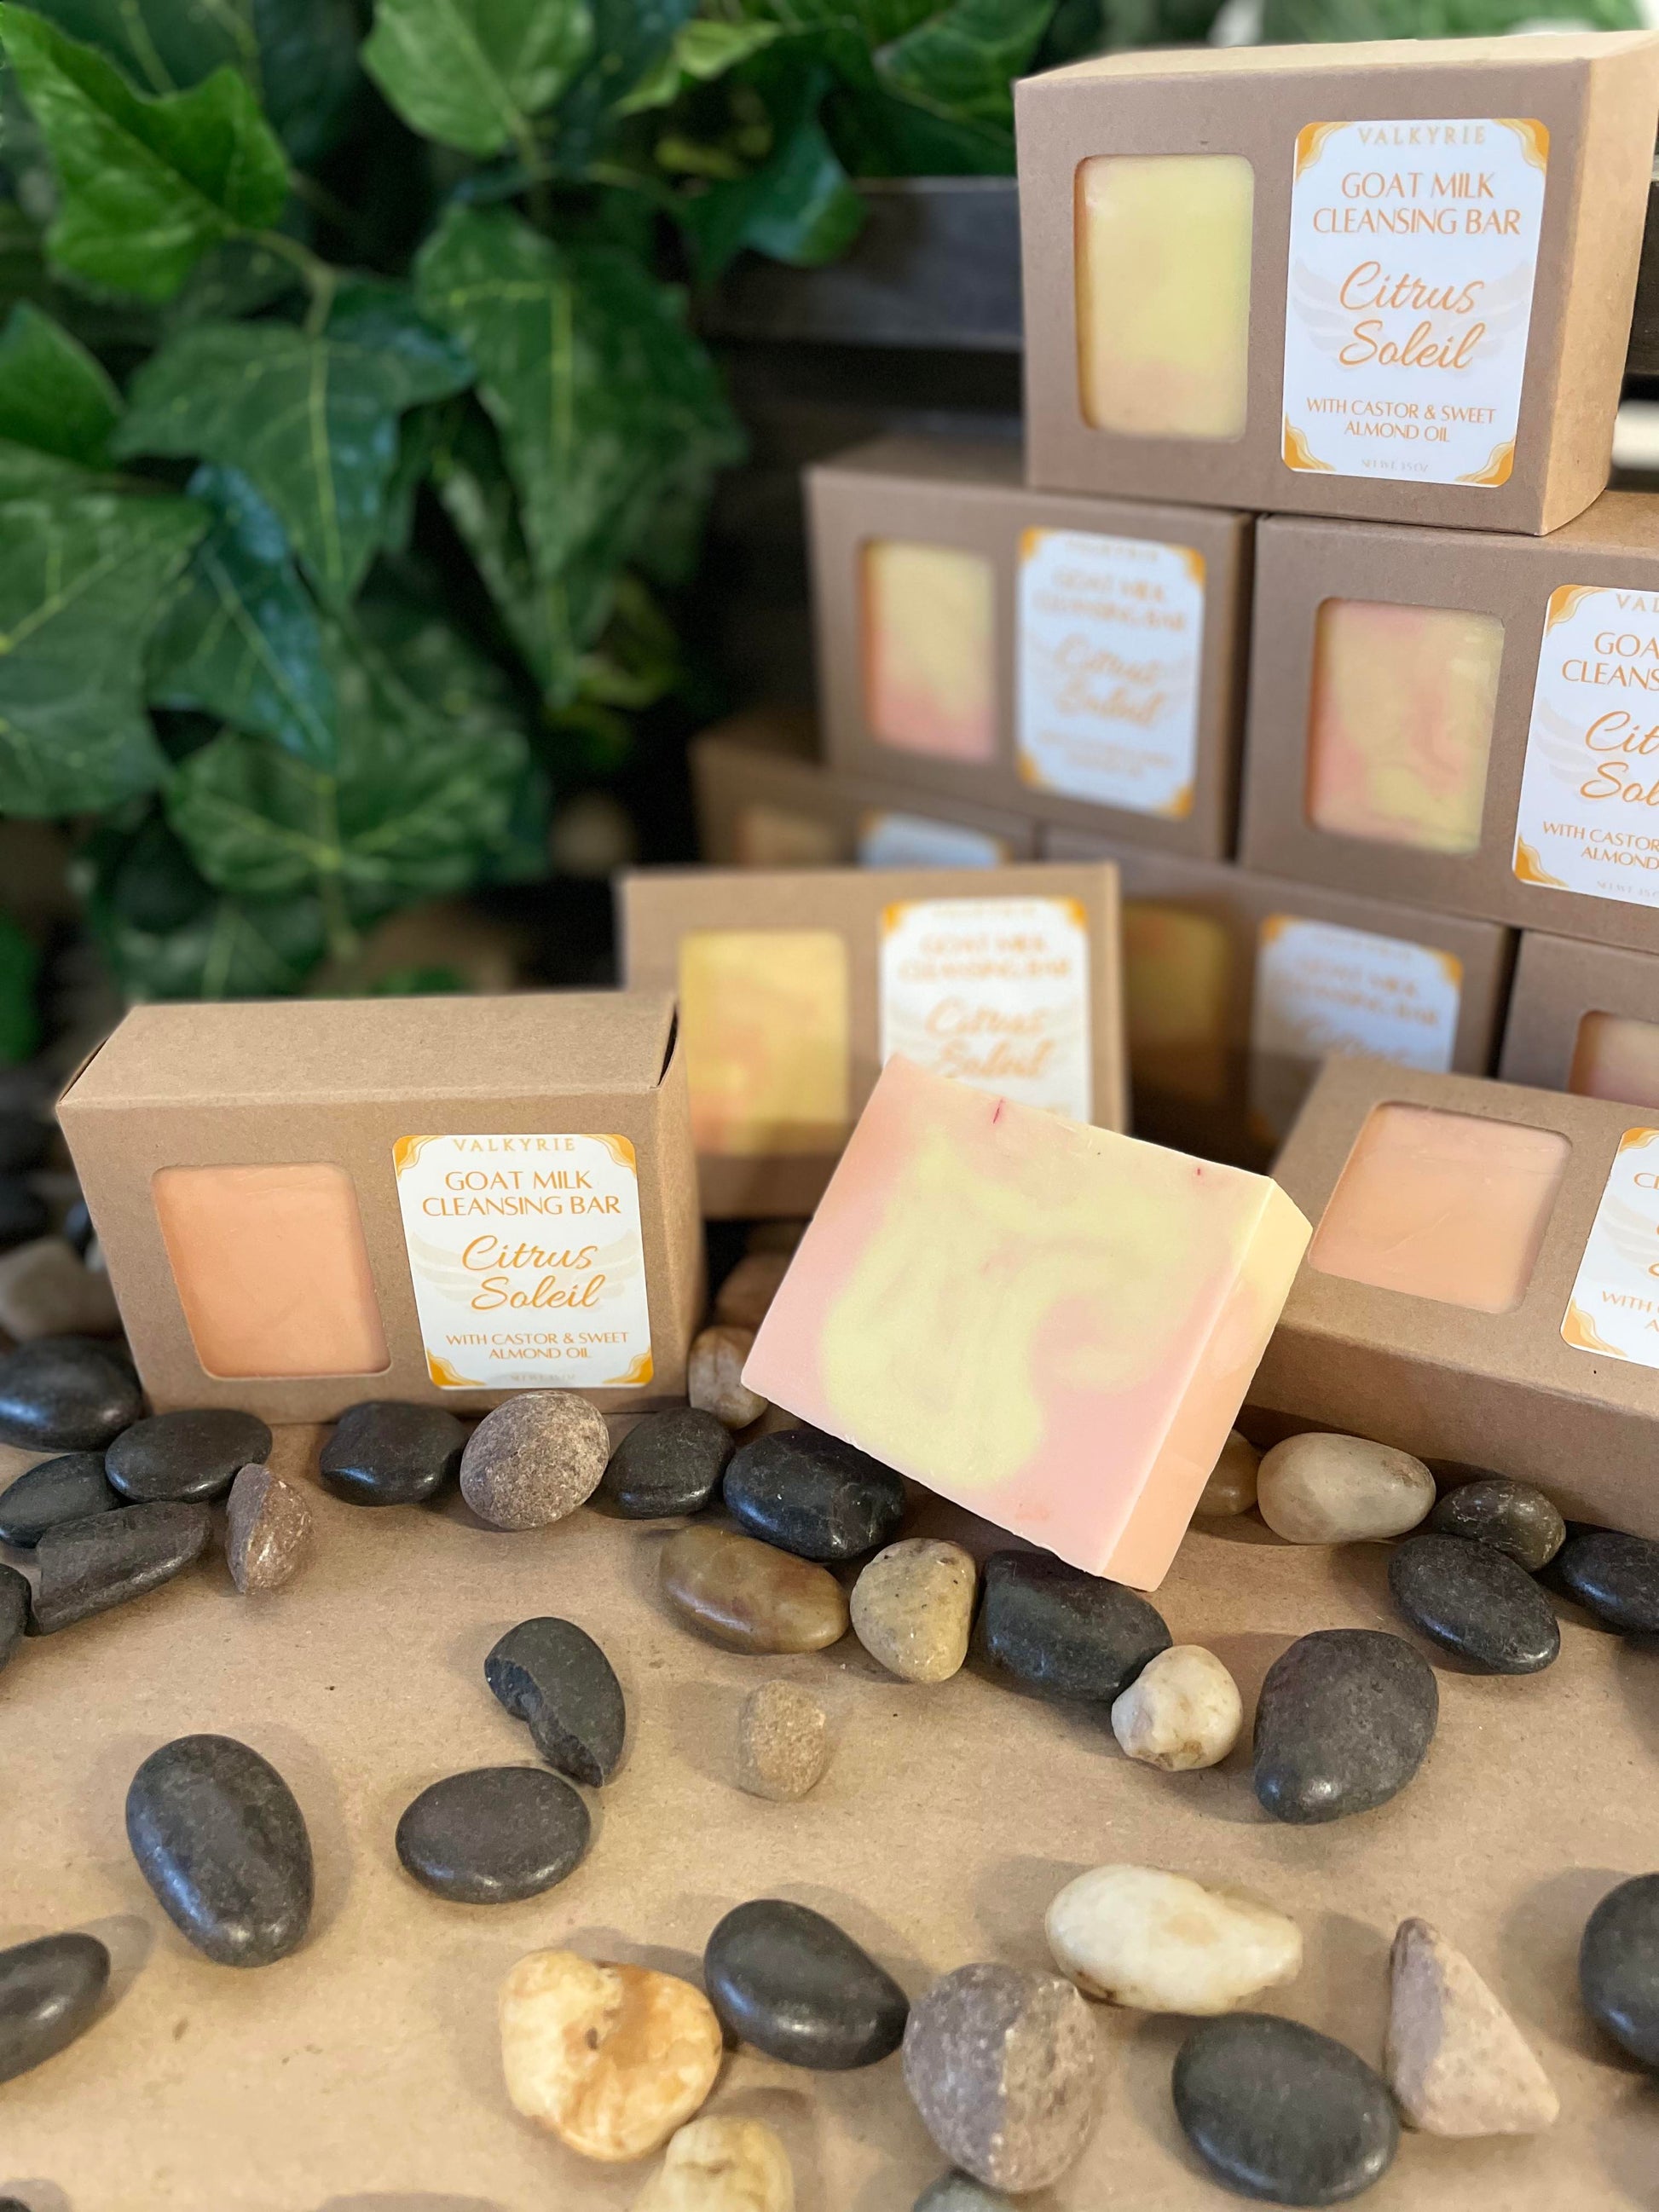 Citrus Soleil Goat Milk Cleansing Bar Valkyrie Global Skin Care Self Care Beauty St. Catharines Ontario Canada